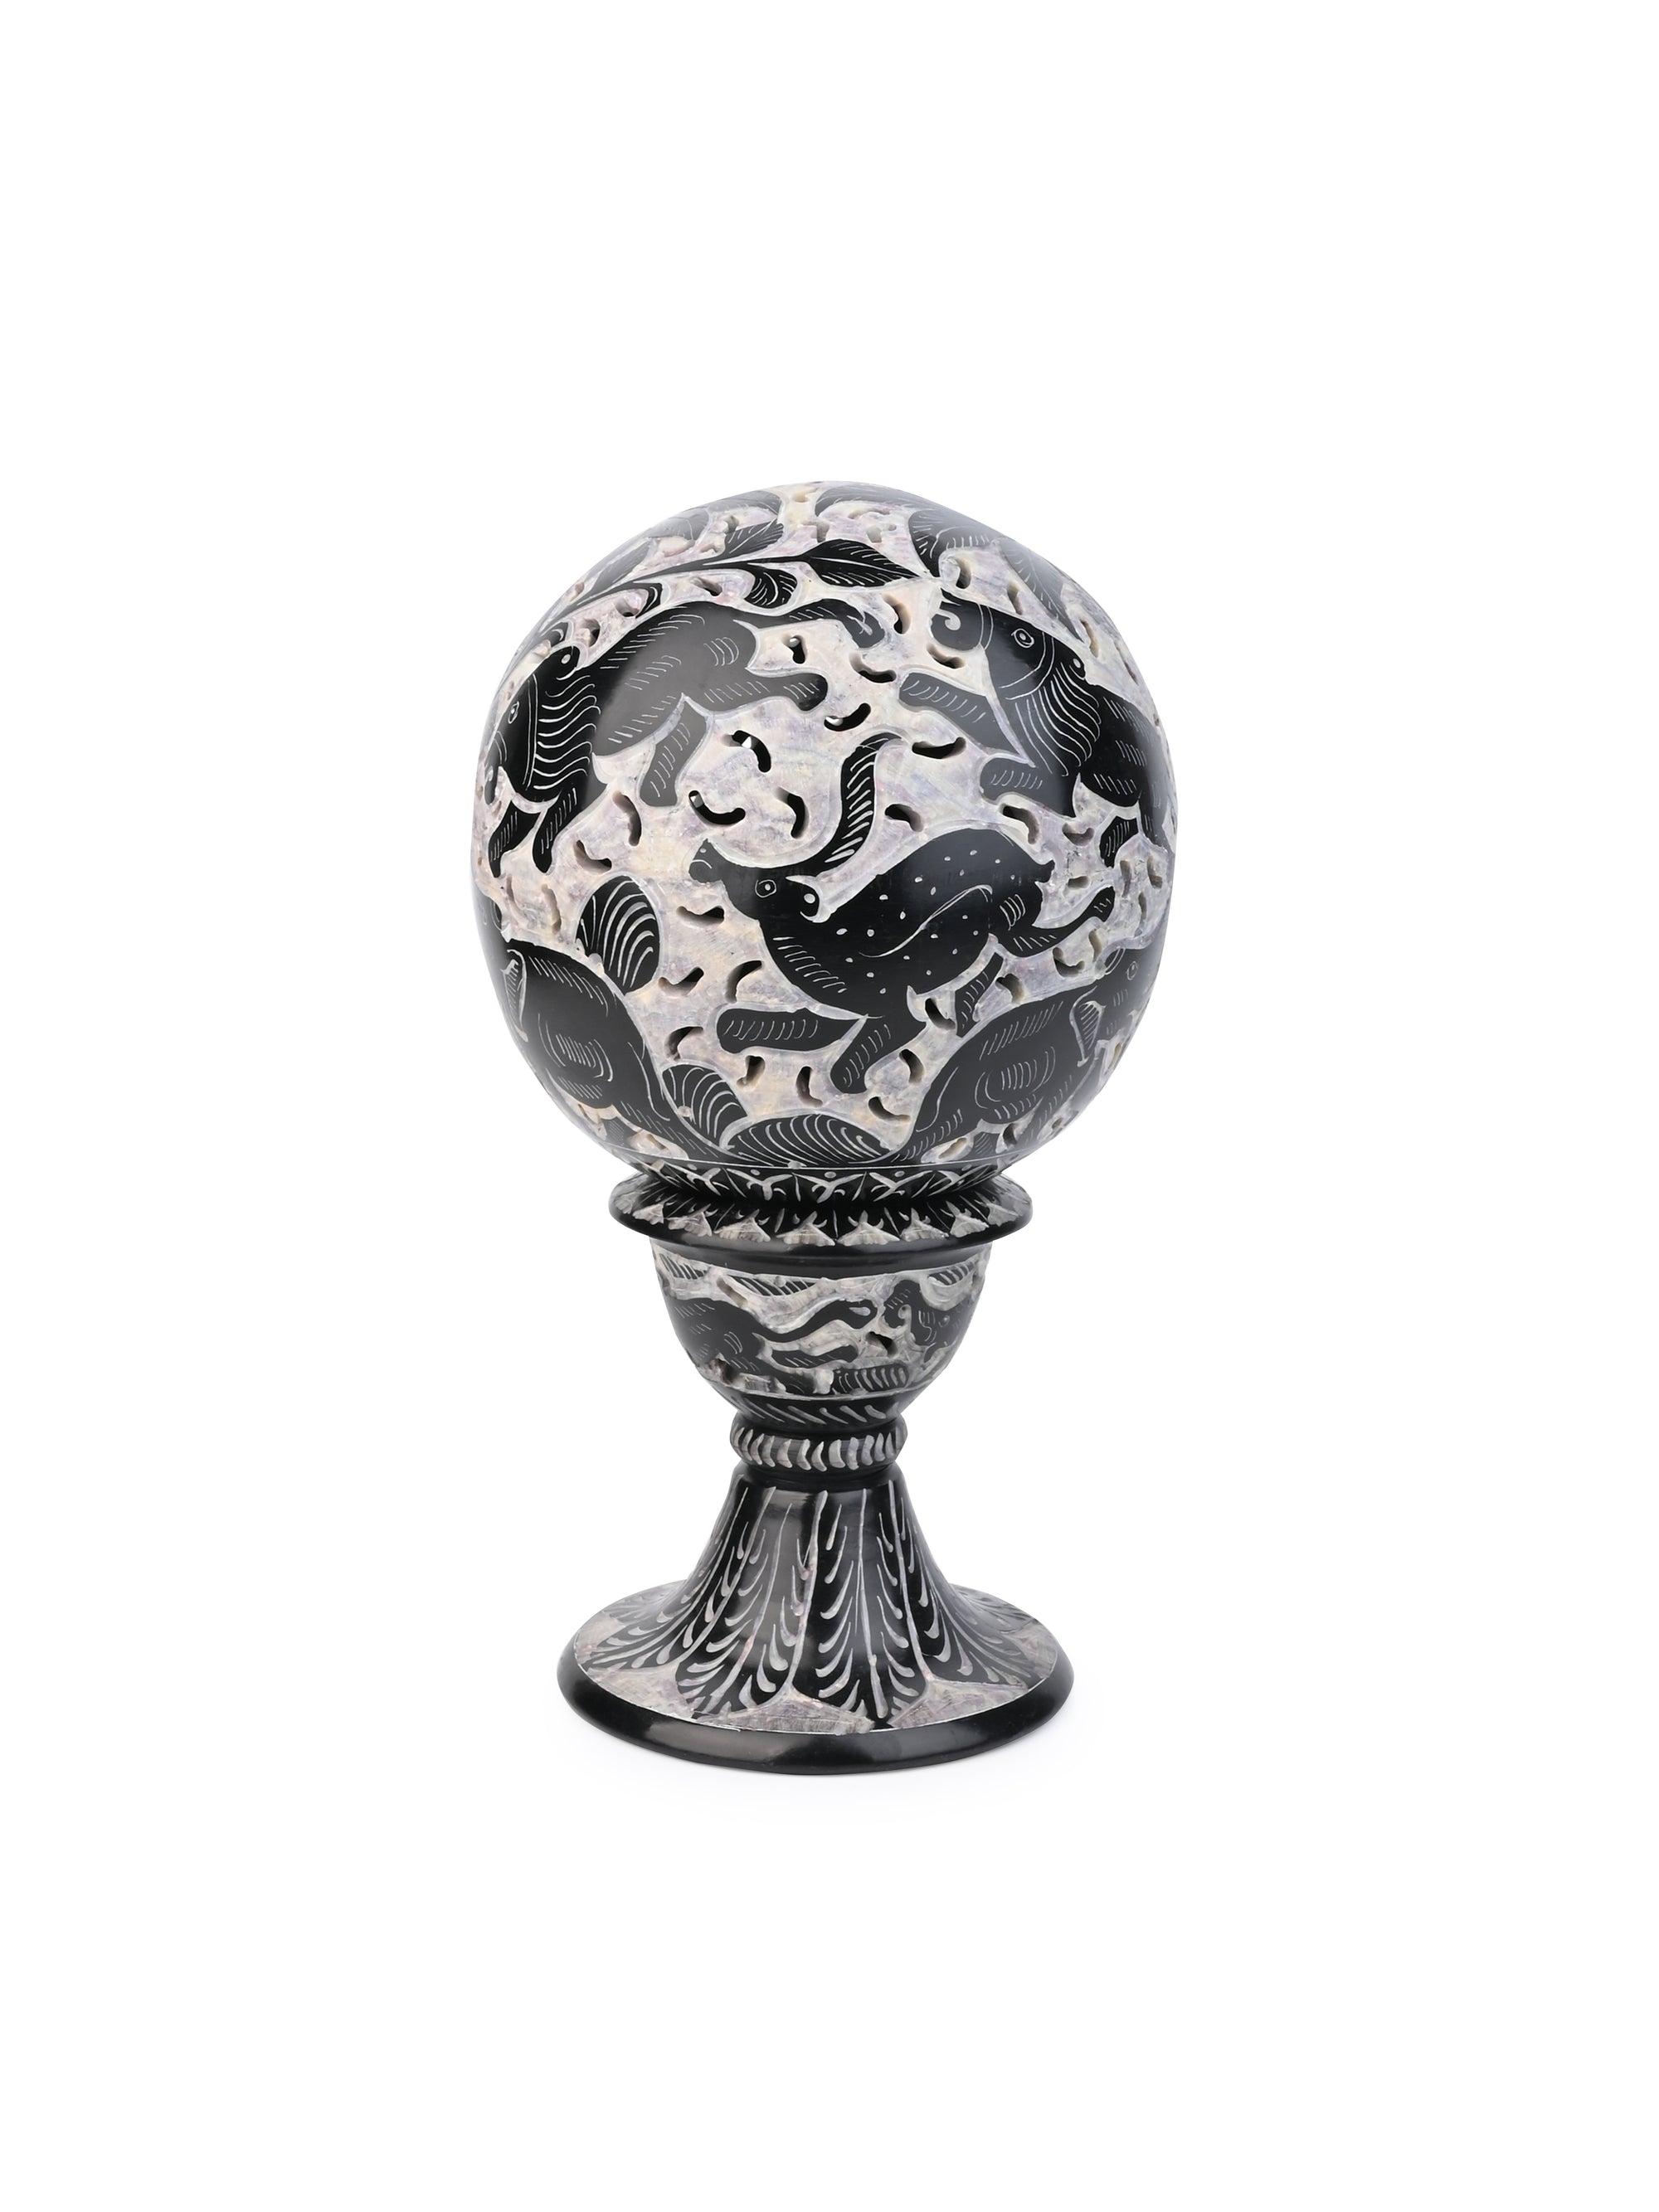 Black Stone Hand Crafted Round Ball Lamp Decor - 10 inches height